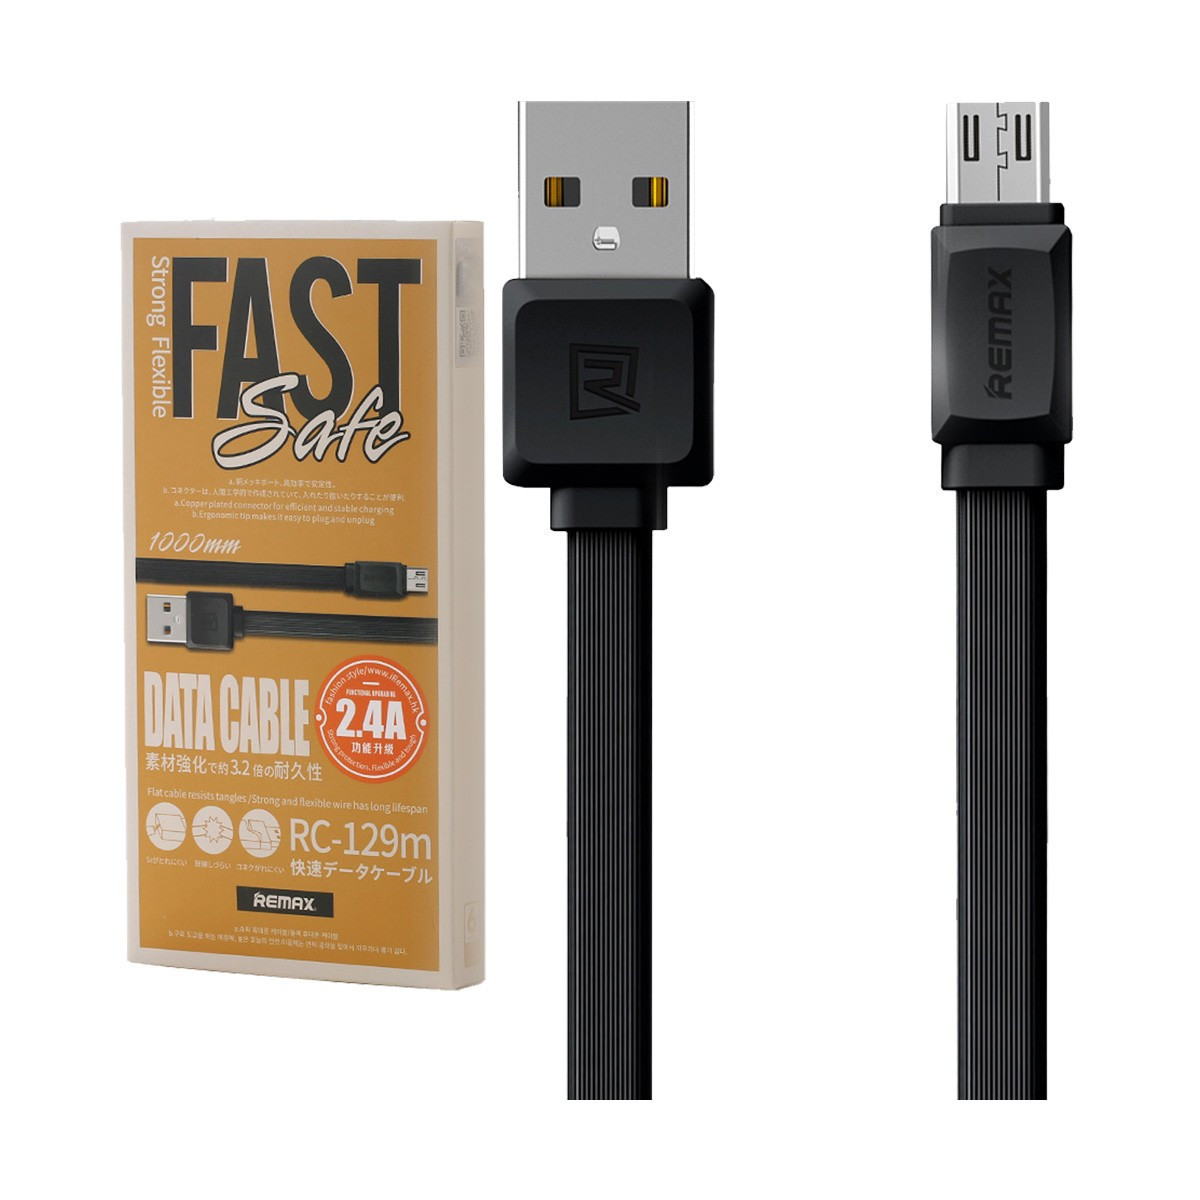 Remax RC-129m Fast Pro MicroUSB 2.4A Fast Charging Data Cable